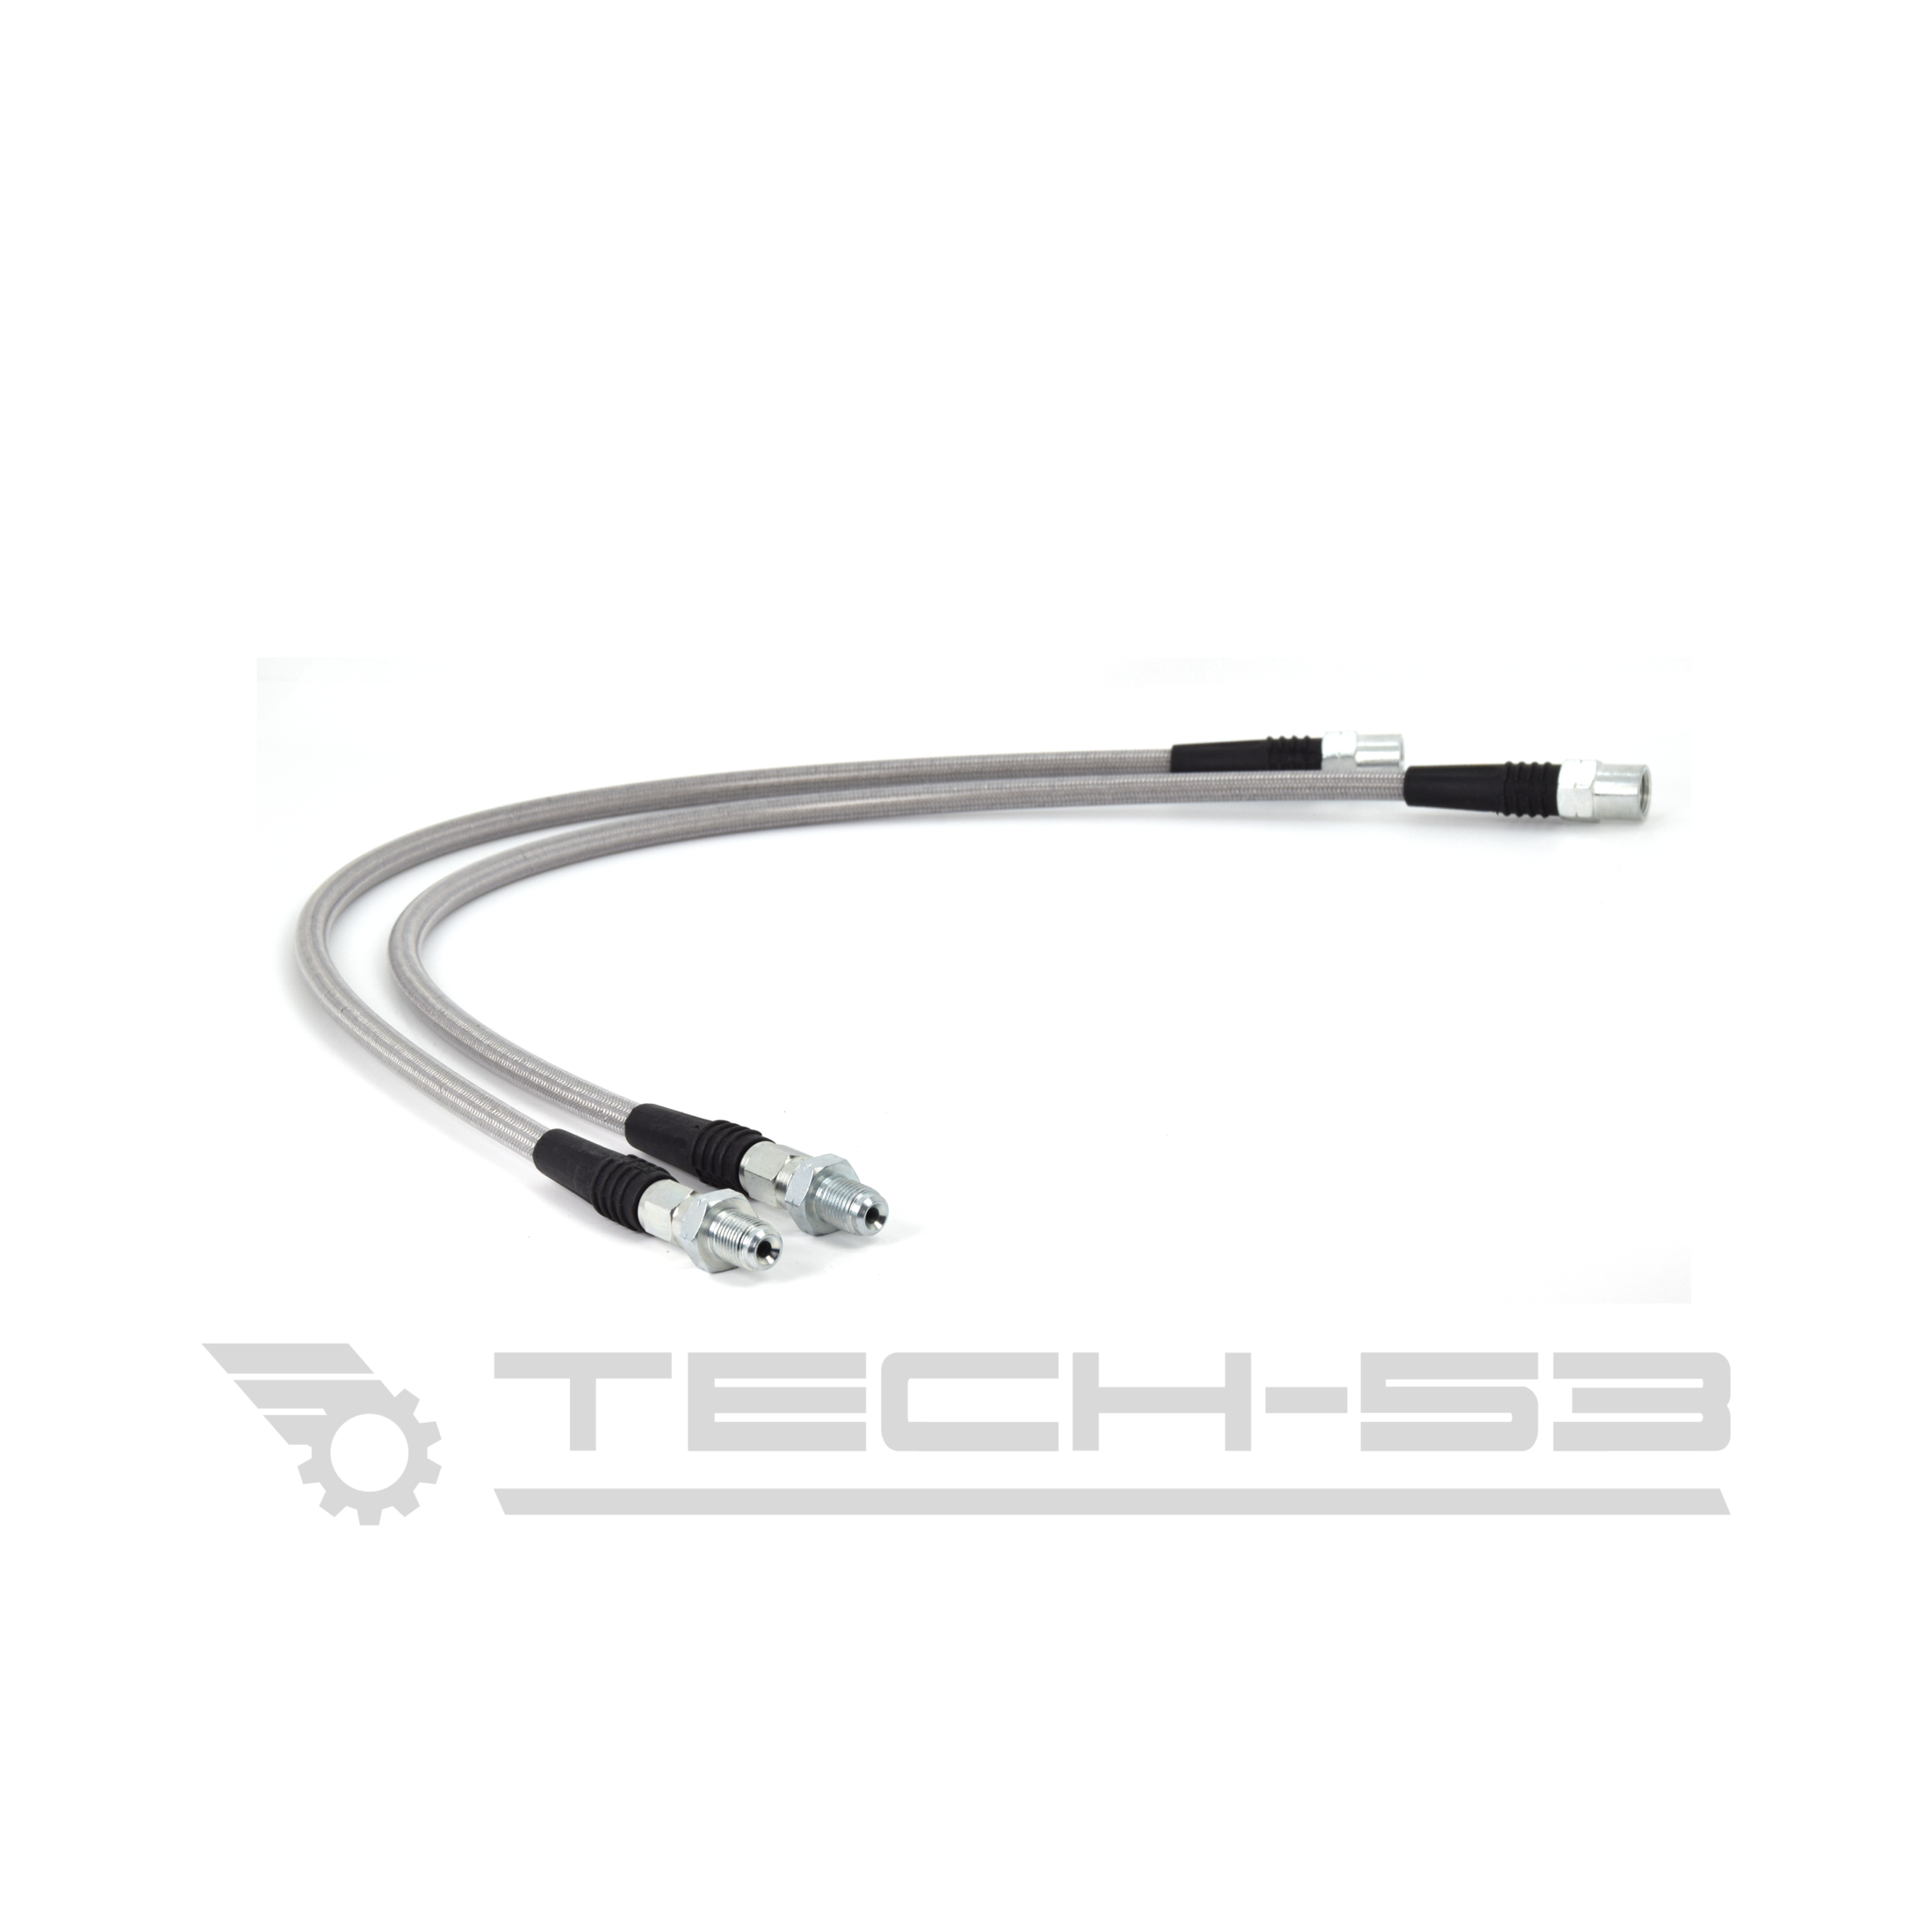 BMW E46 320I 323I 325I 325CI 328I 328CI 330I 330CI REAR BRAKE LINE UPGRADE STAINLESS STEEL BRAIDED TRACK